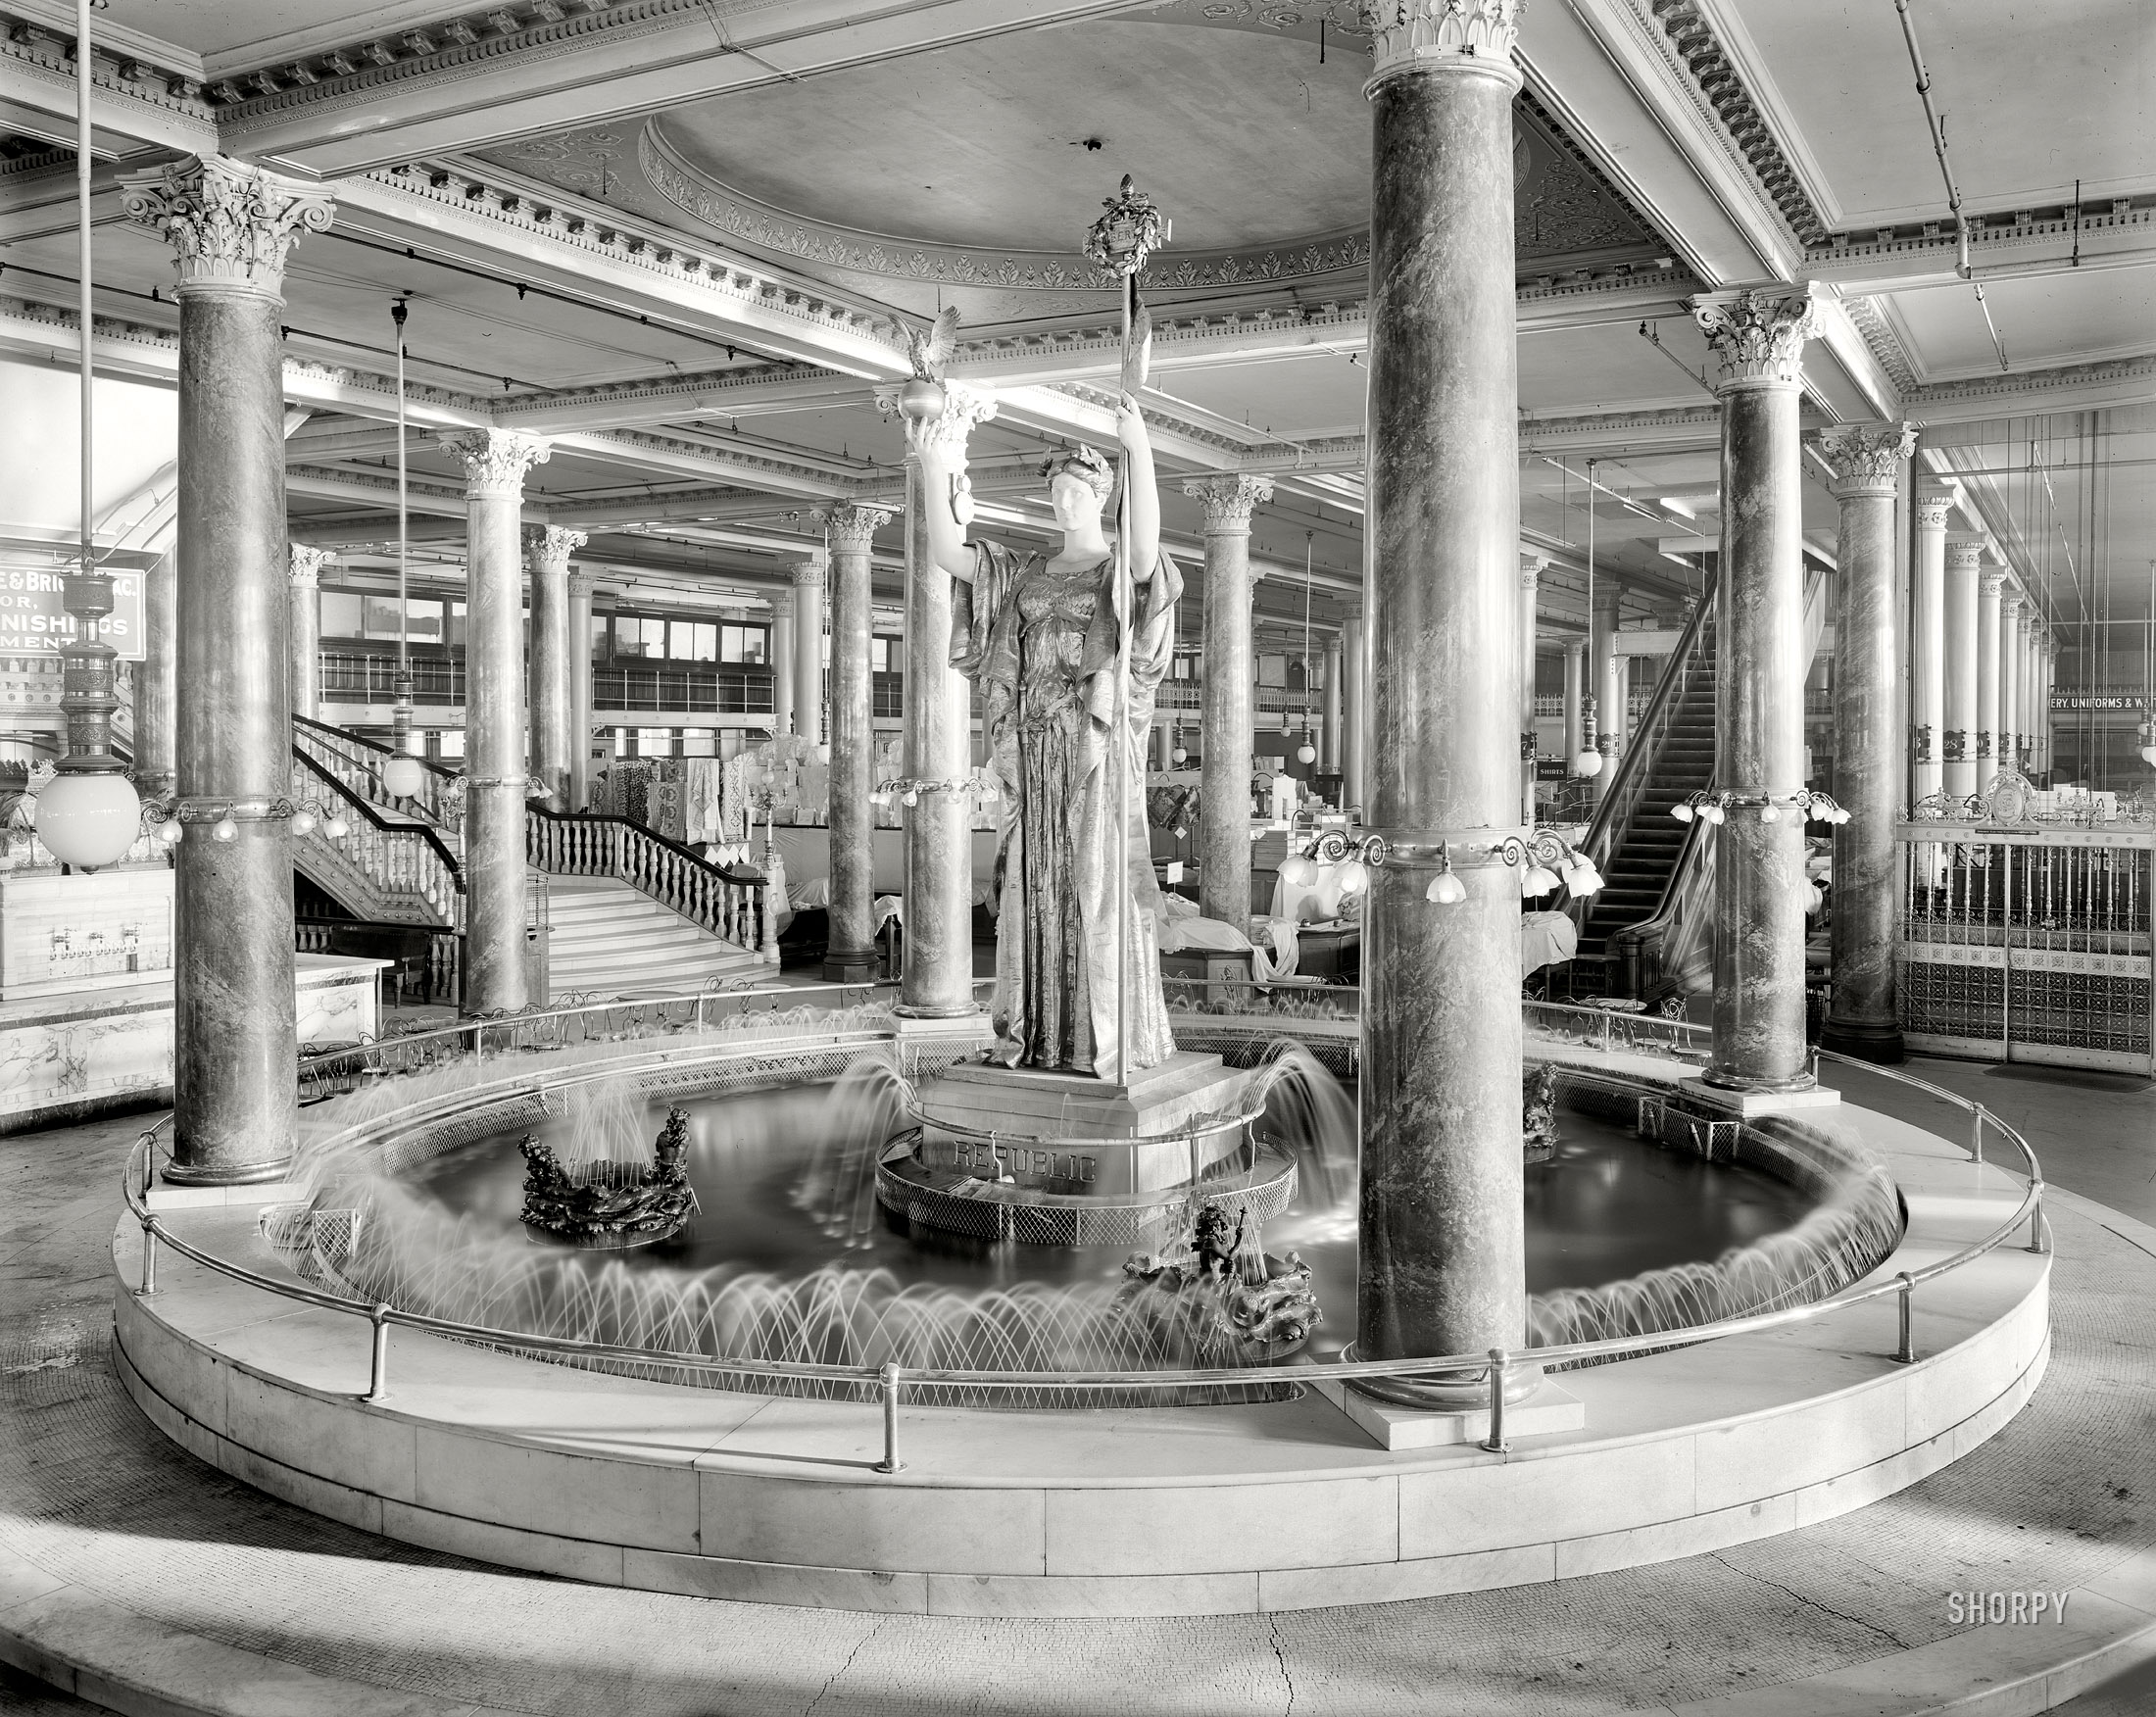 New York circa 1910. "Siegel Cooper & Co., the fountain. Republic statue." 8x10 inch dry plate glass negative, Detroit Publishing Company. View full size.